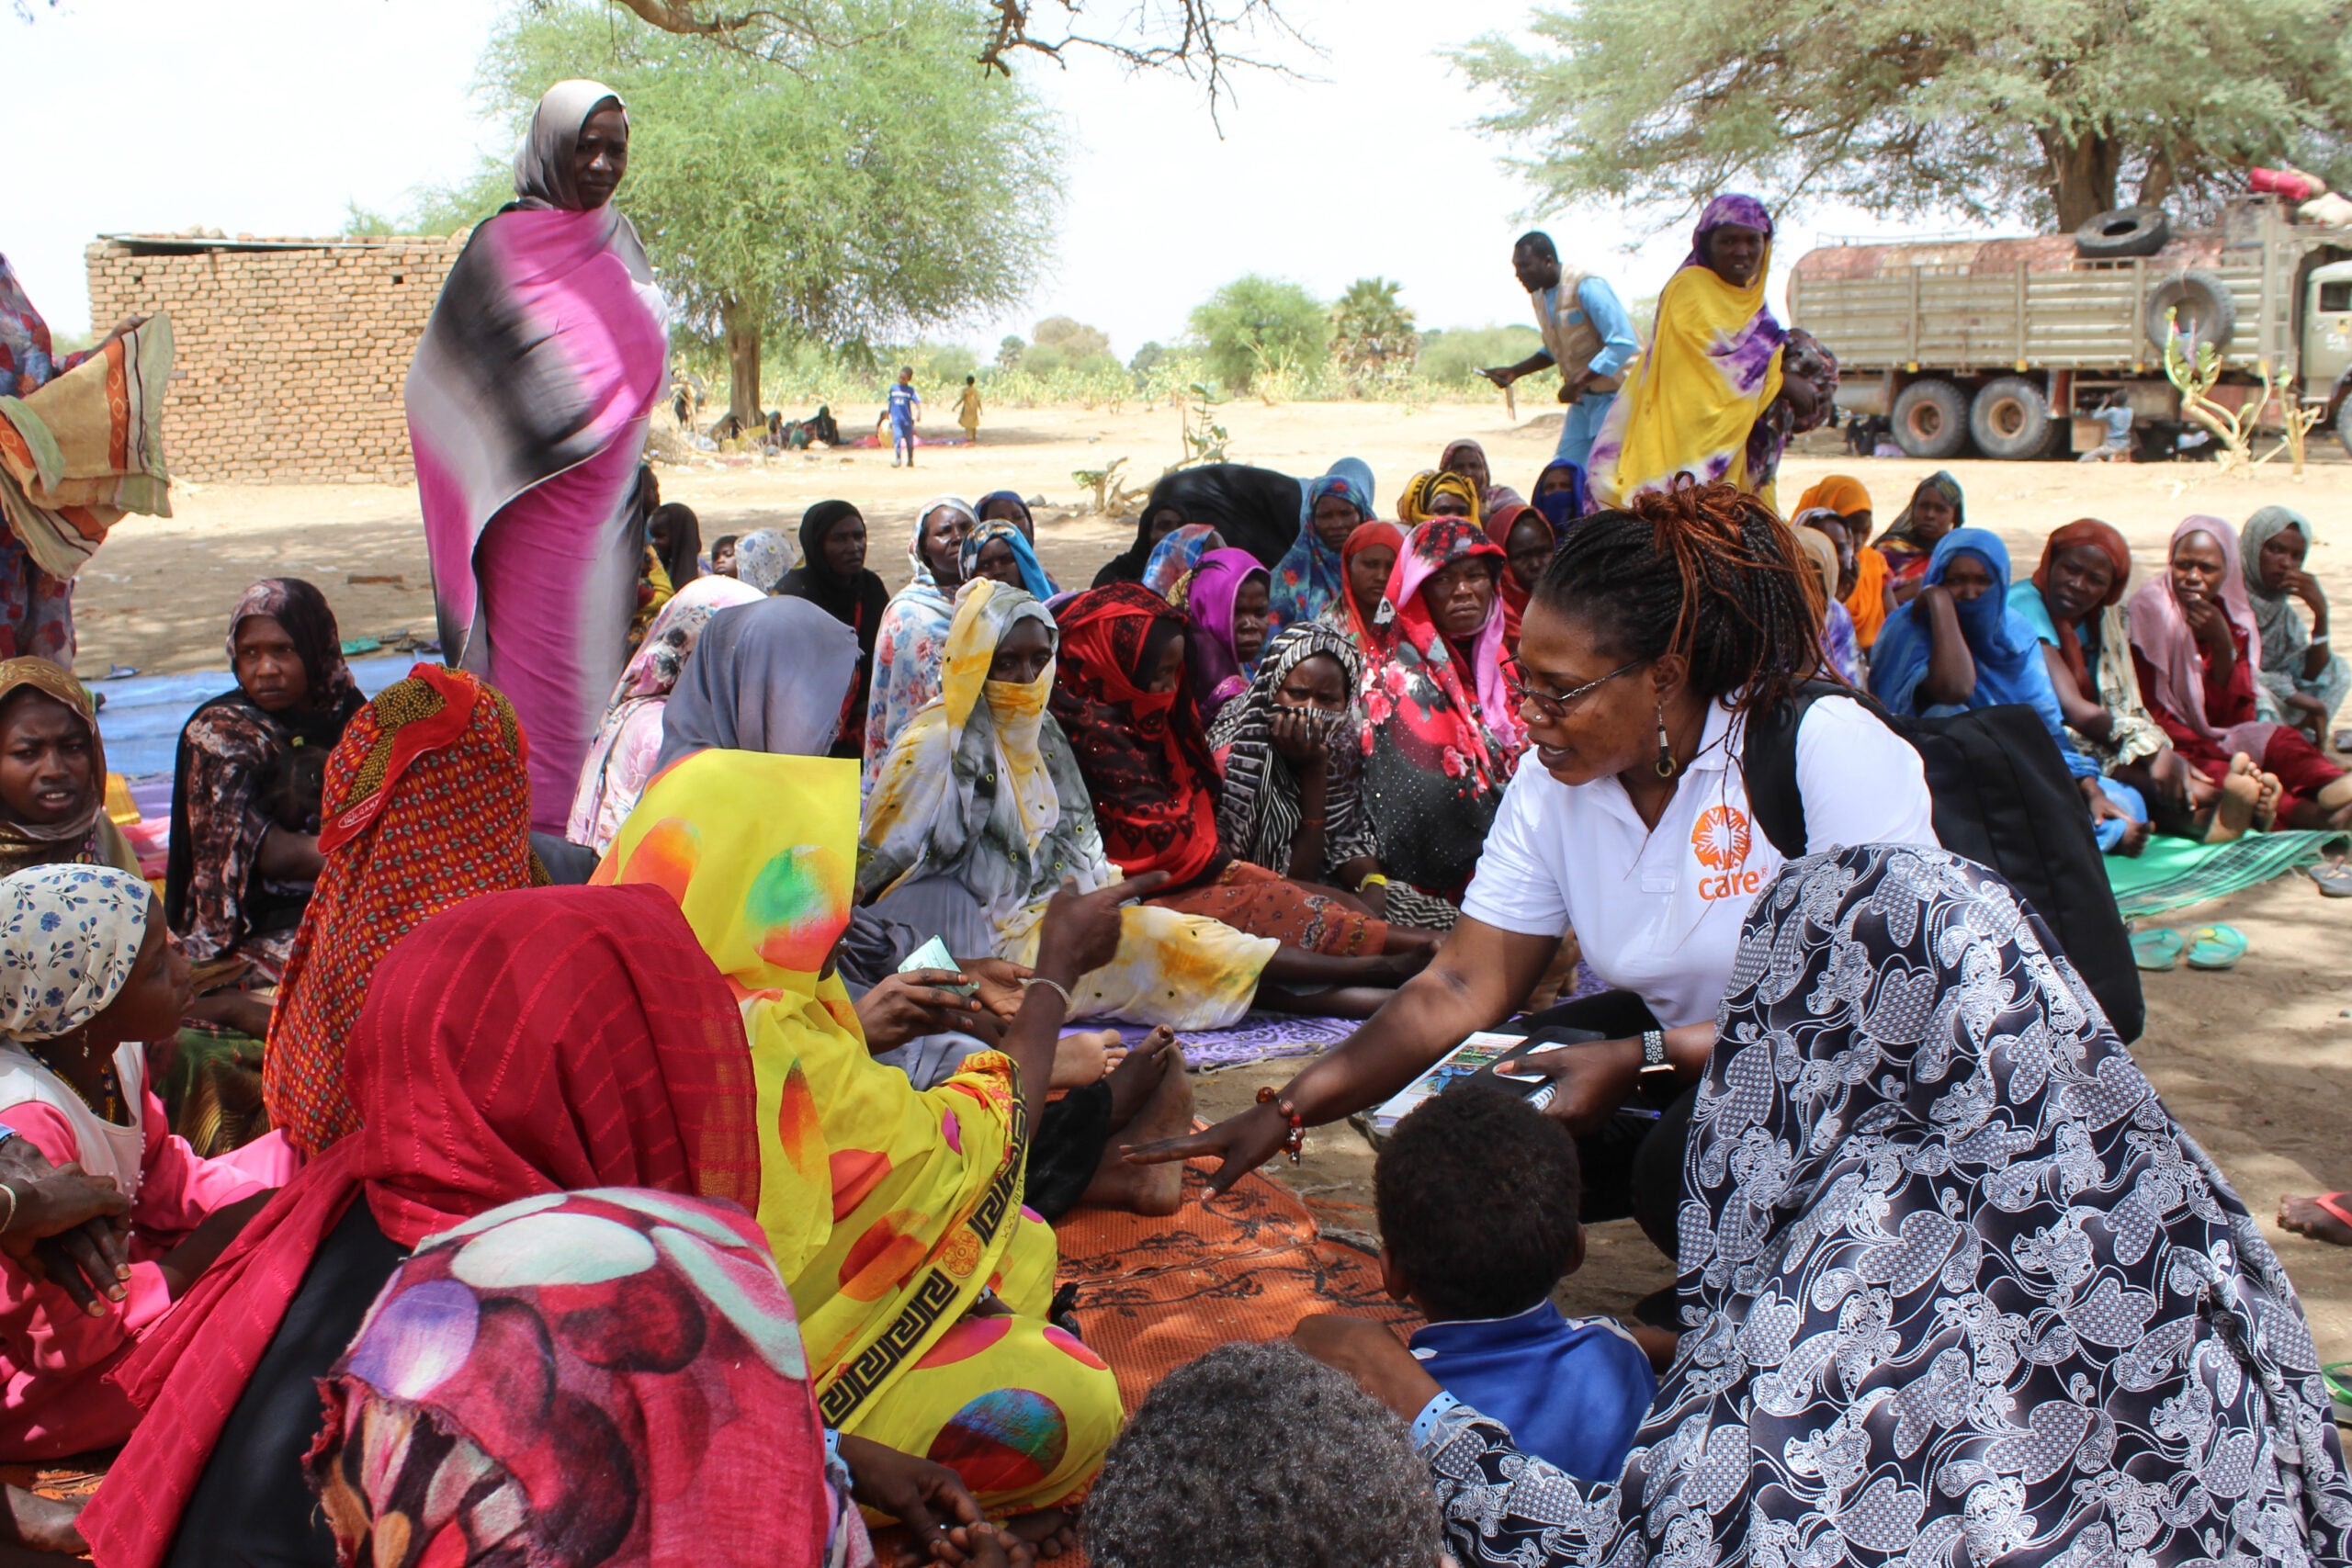 SUDAN: “Even here, we are not safe”: Refugees in Chad face extreme hardship  as conflict continues in Sudan 